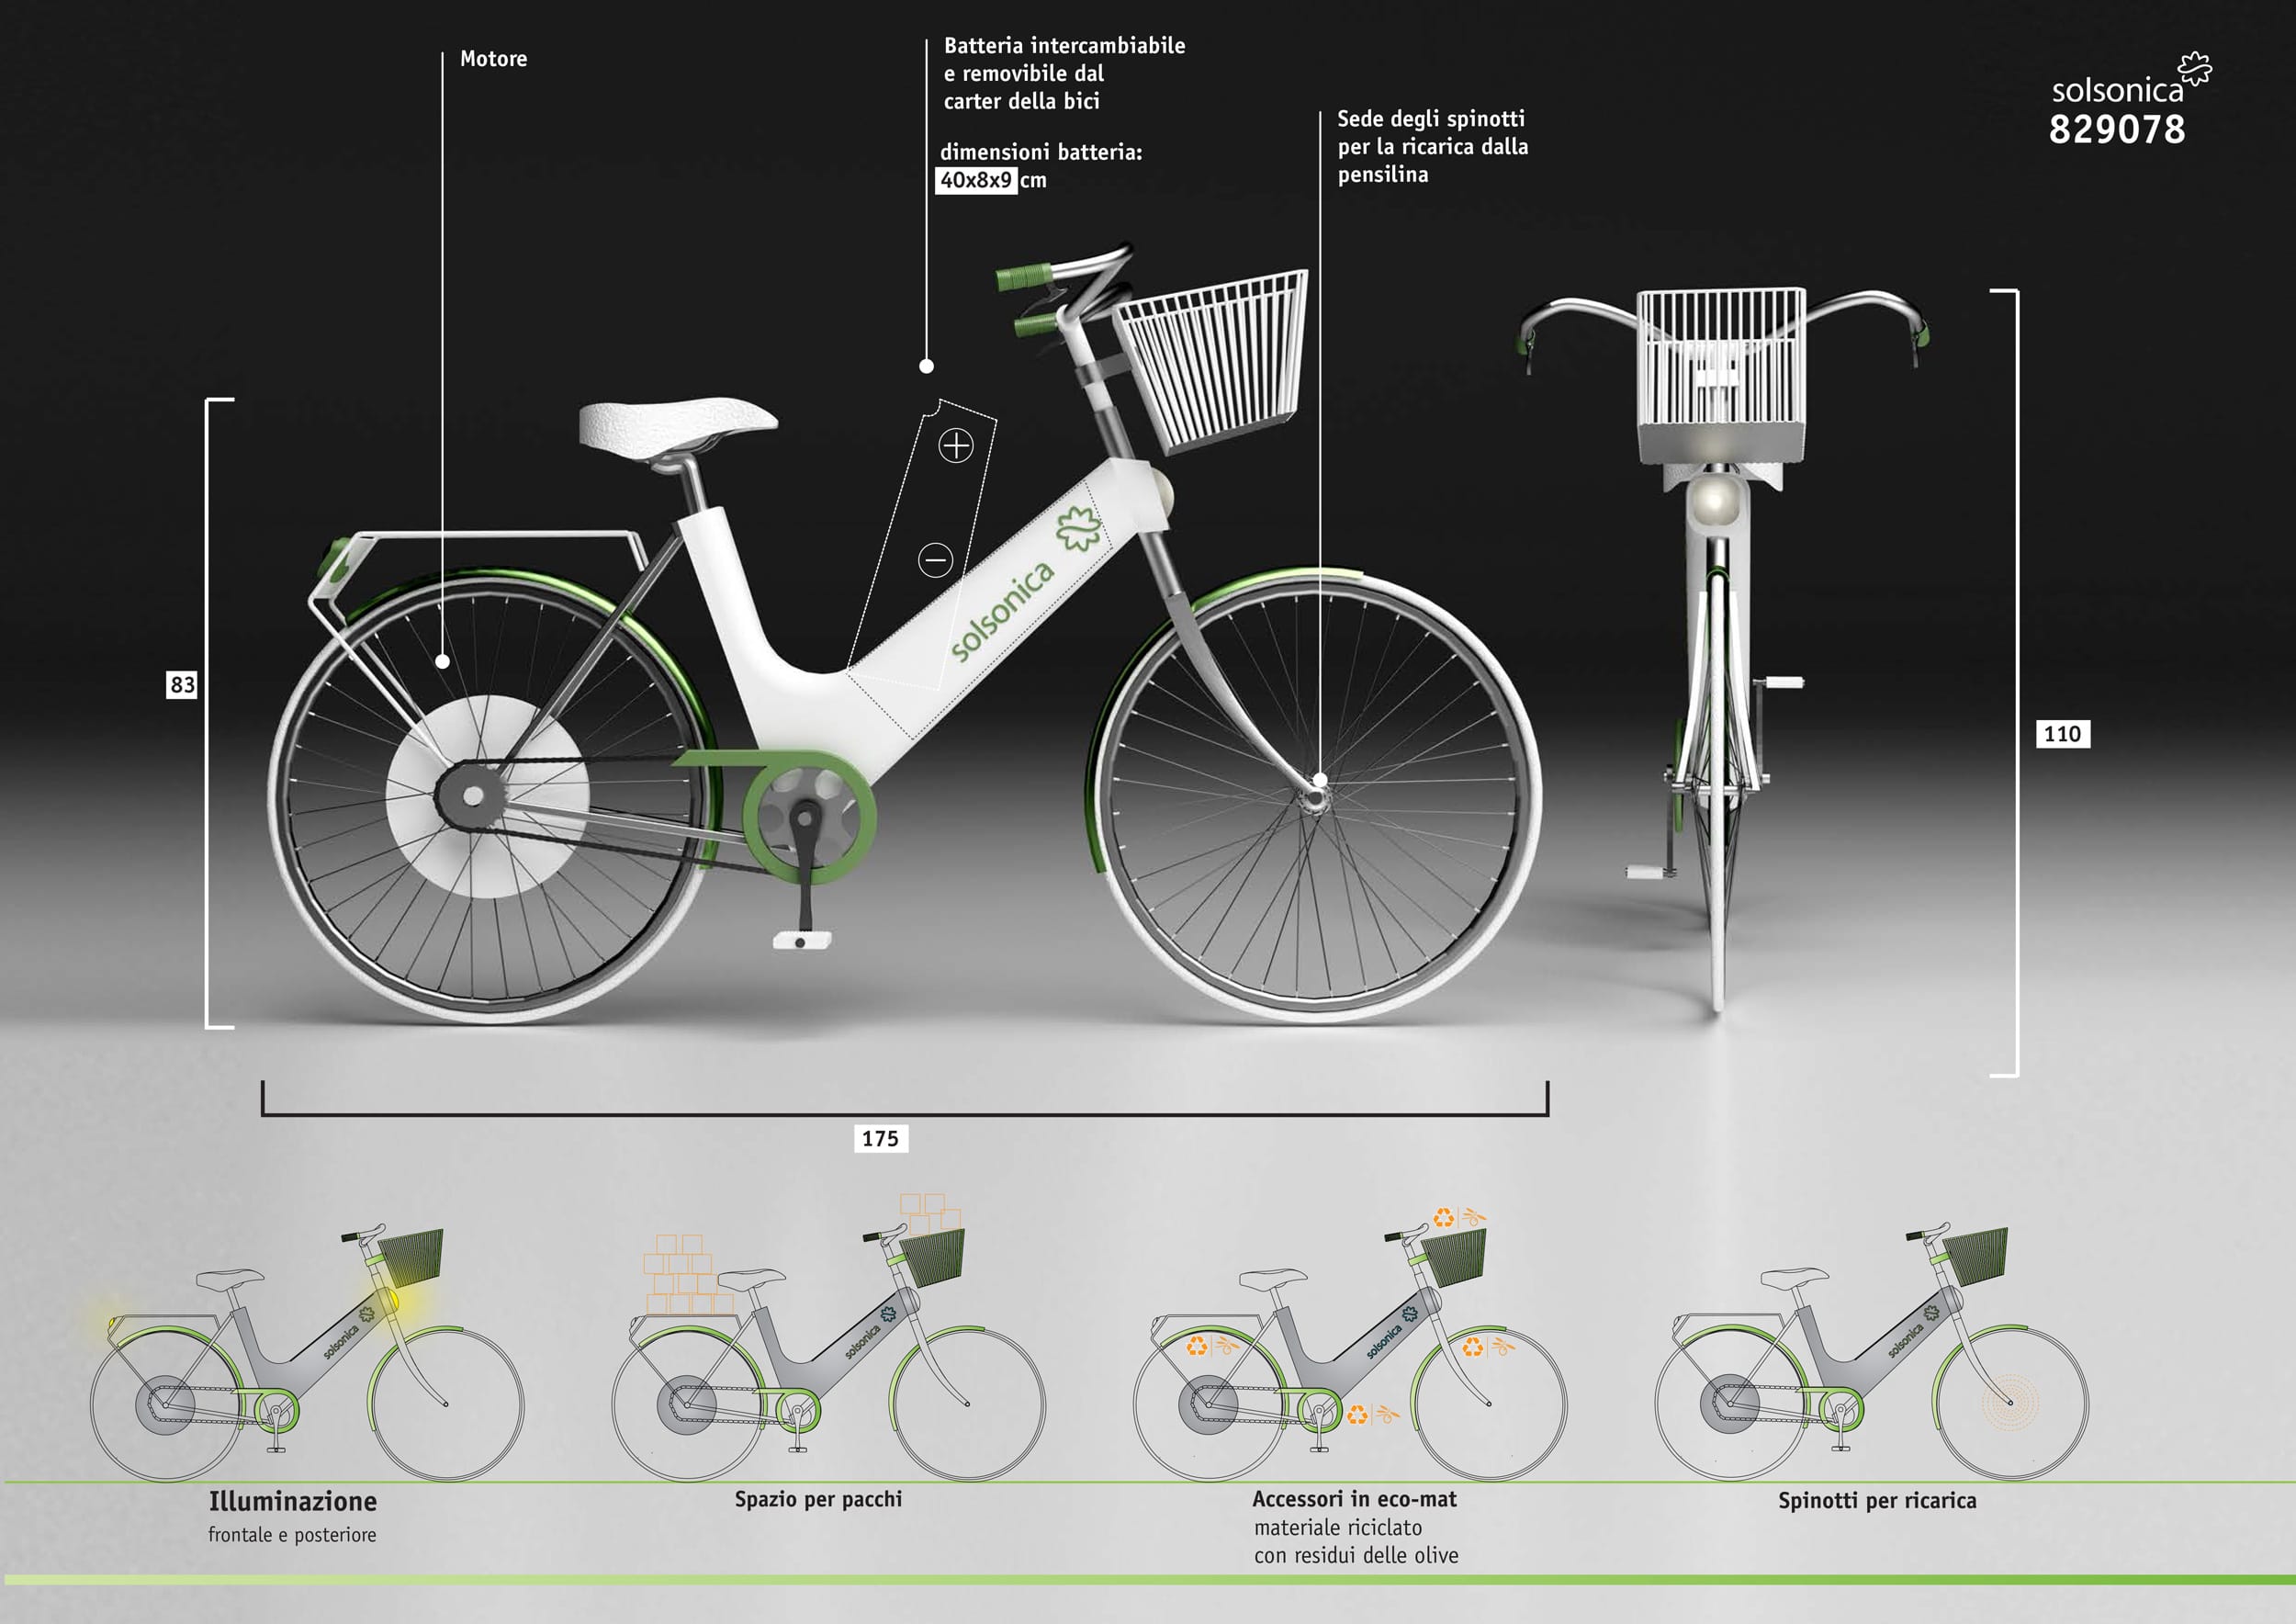 Eco Bike Design Contest 2012 competition with the aim of selecting innovative projects involving an electrically assisted bicycle and a photovoltaic shelter to protect and recharge it.